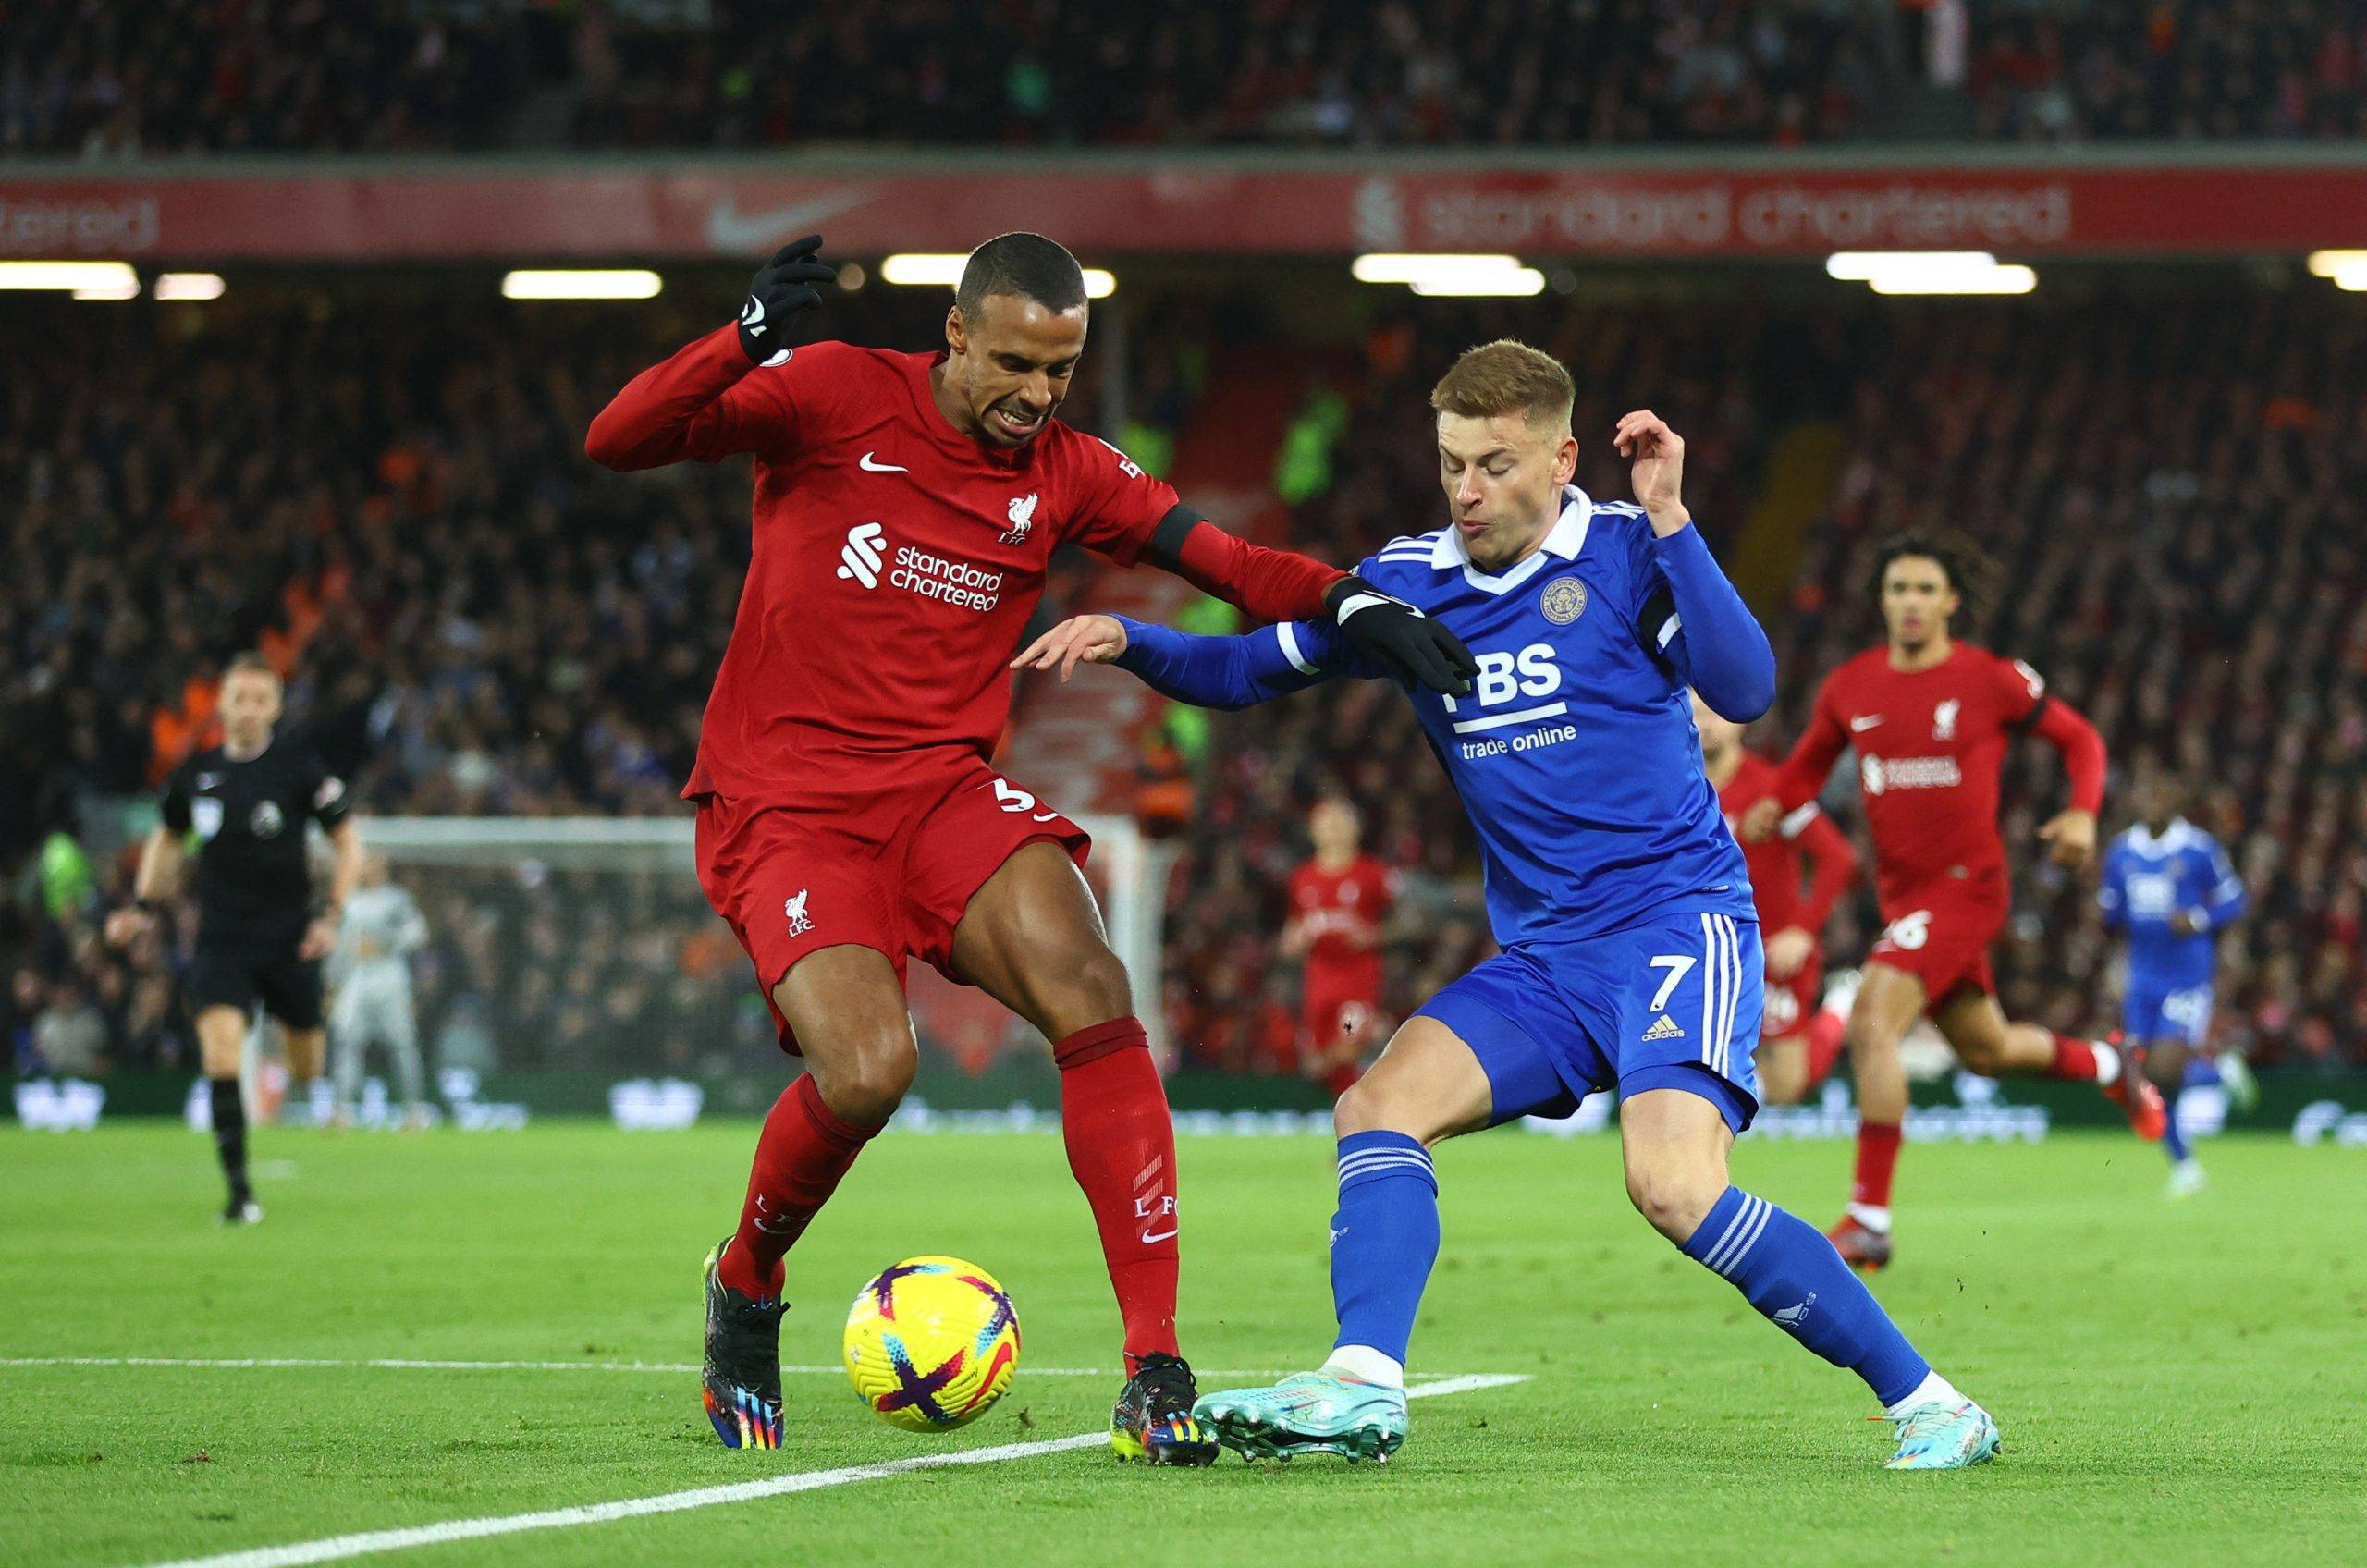 Liverpool: Joel Matip could be sold for £15m - Liverpool News